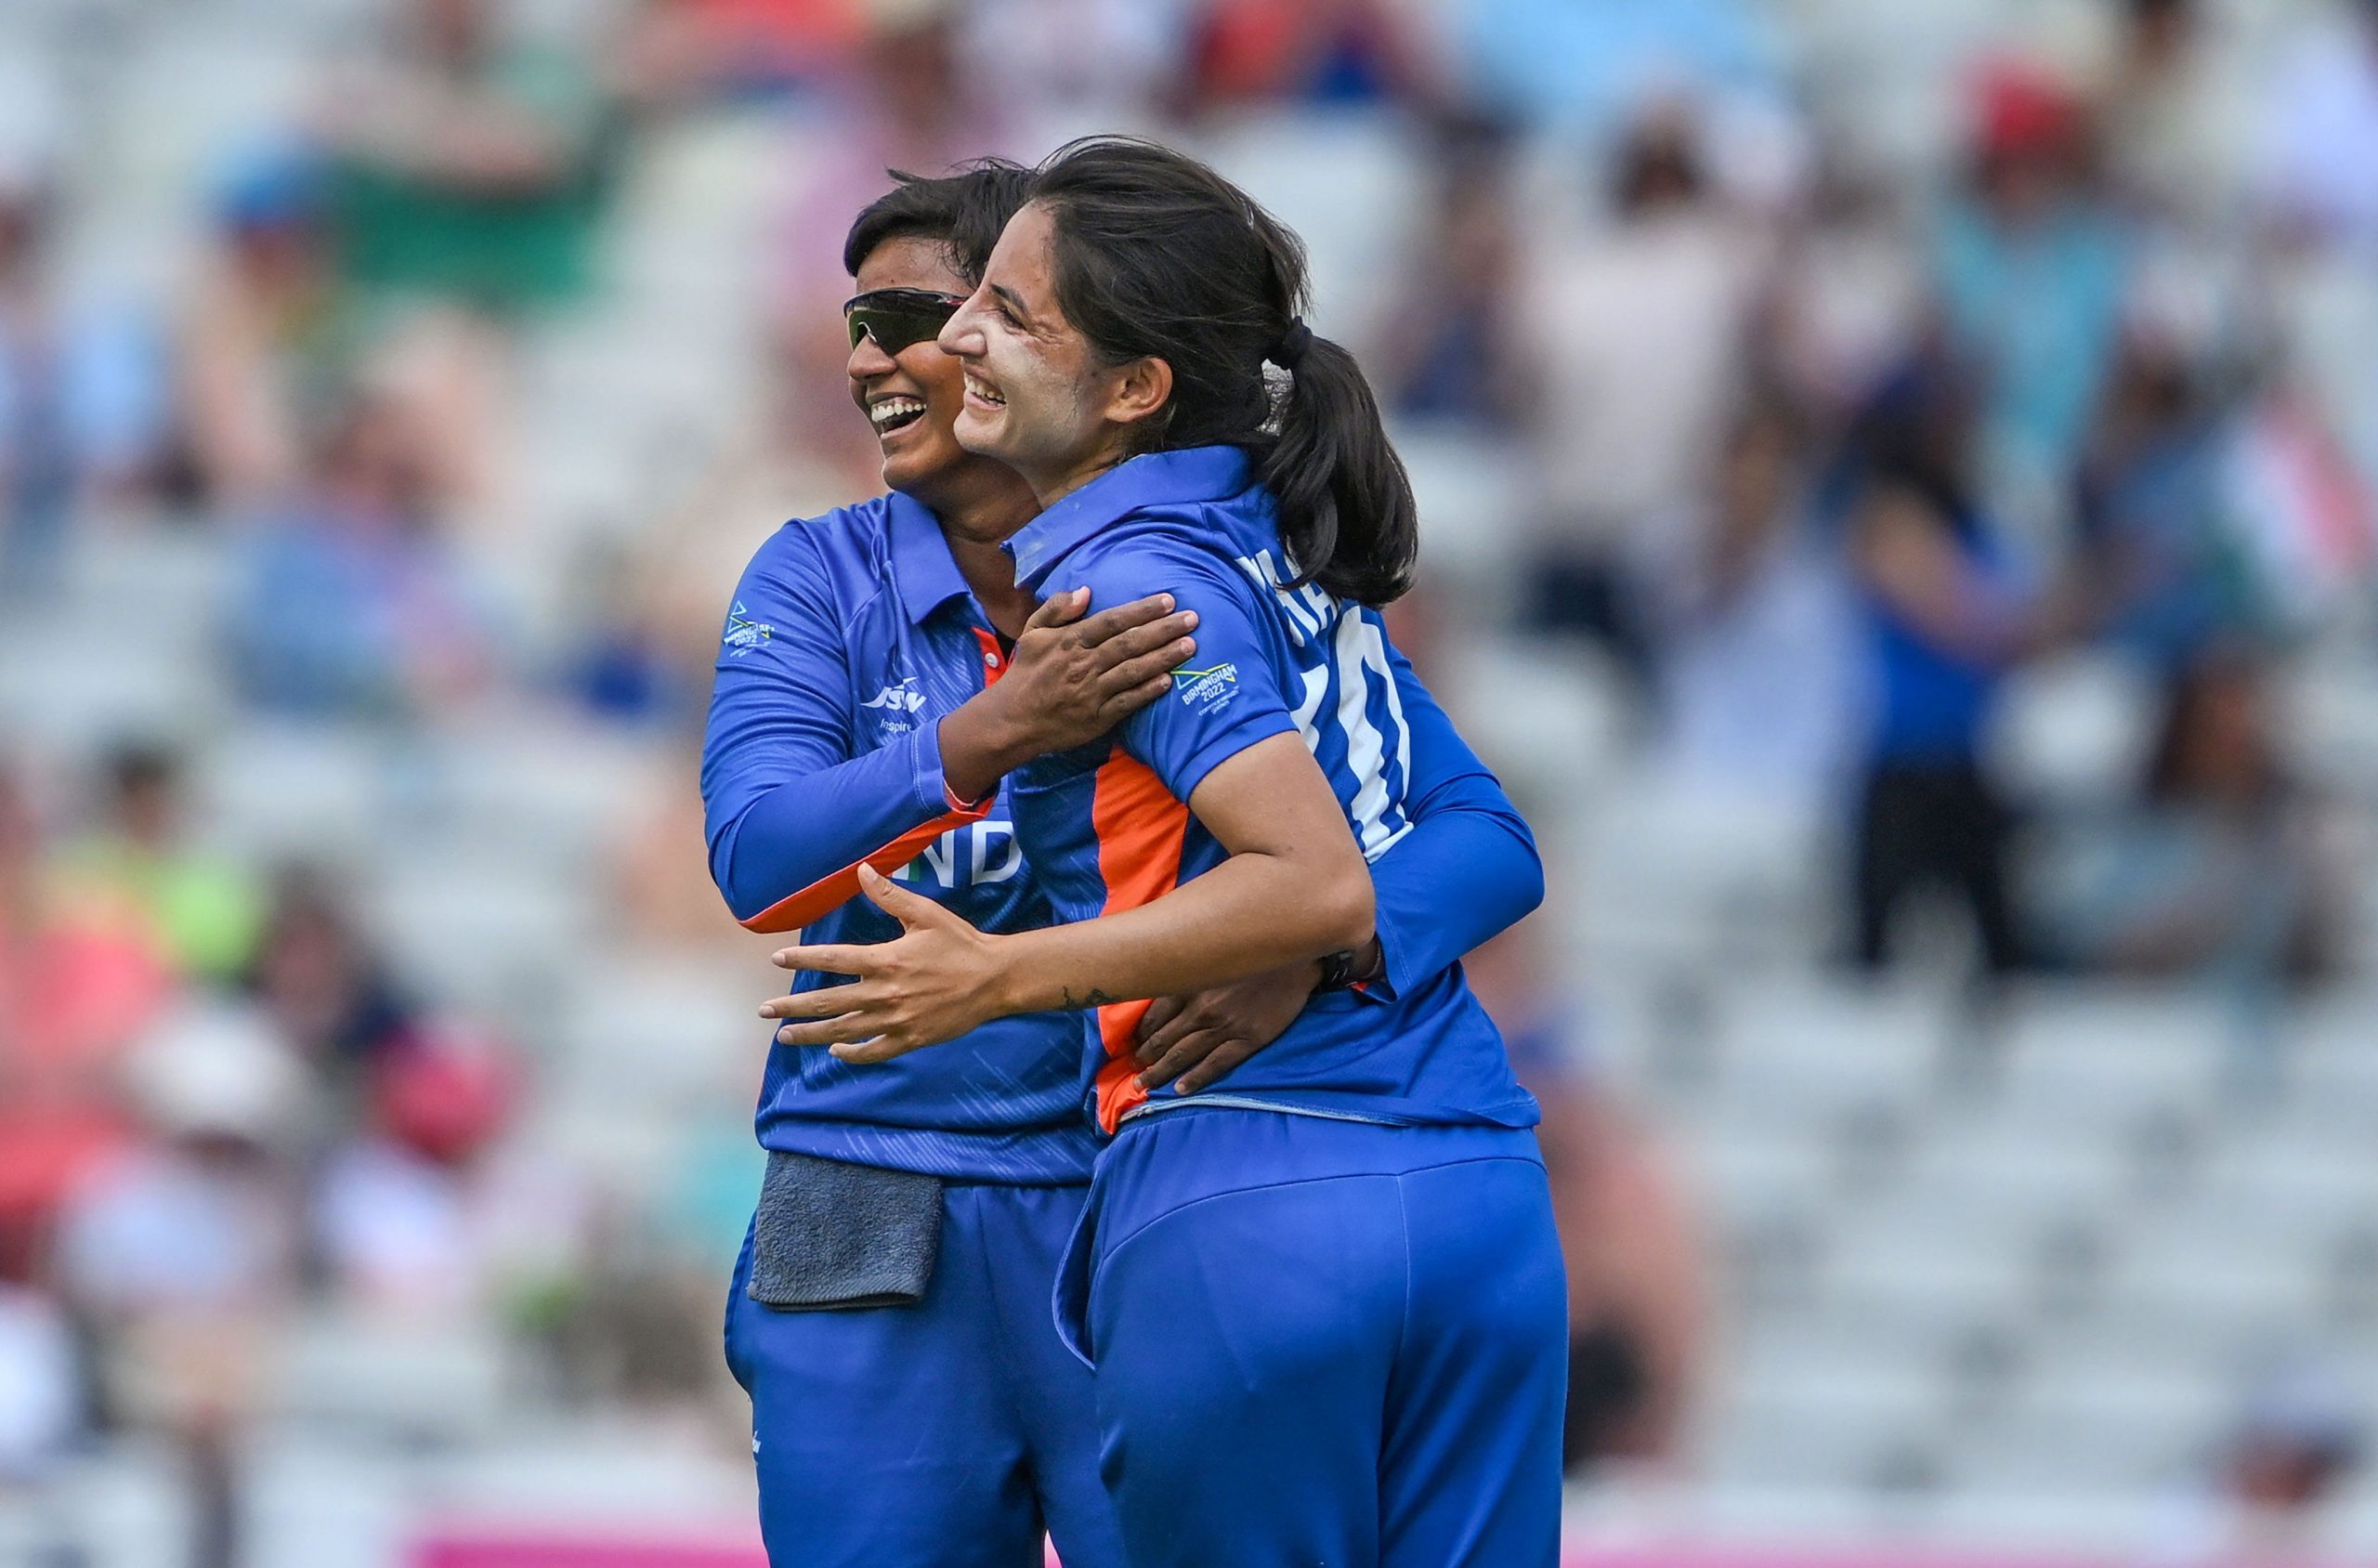 CWG 2022: Indian women’s cricket team maul Barbados by 100 runs to race into semifinals